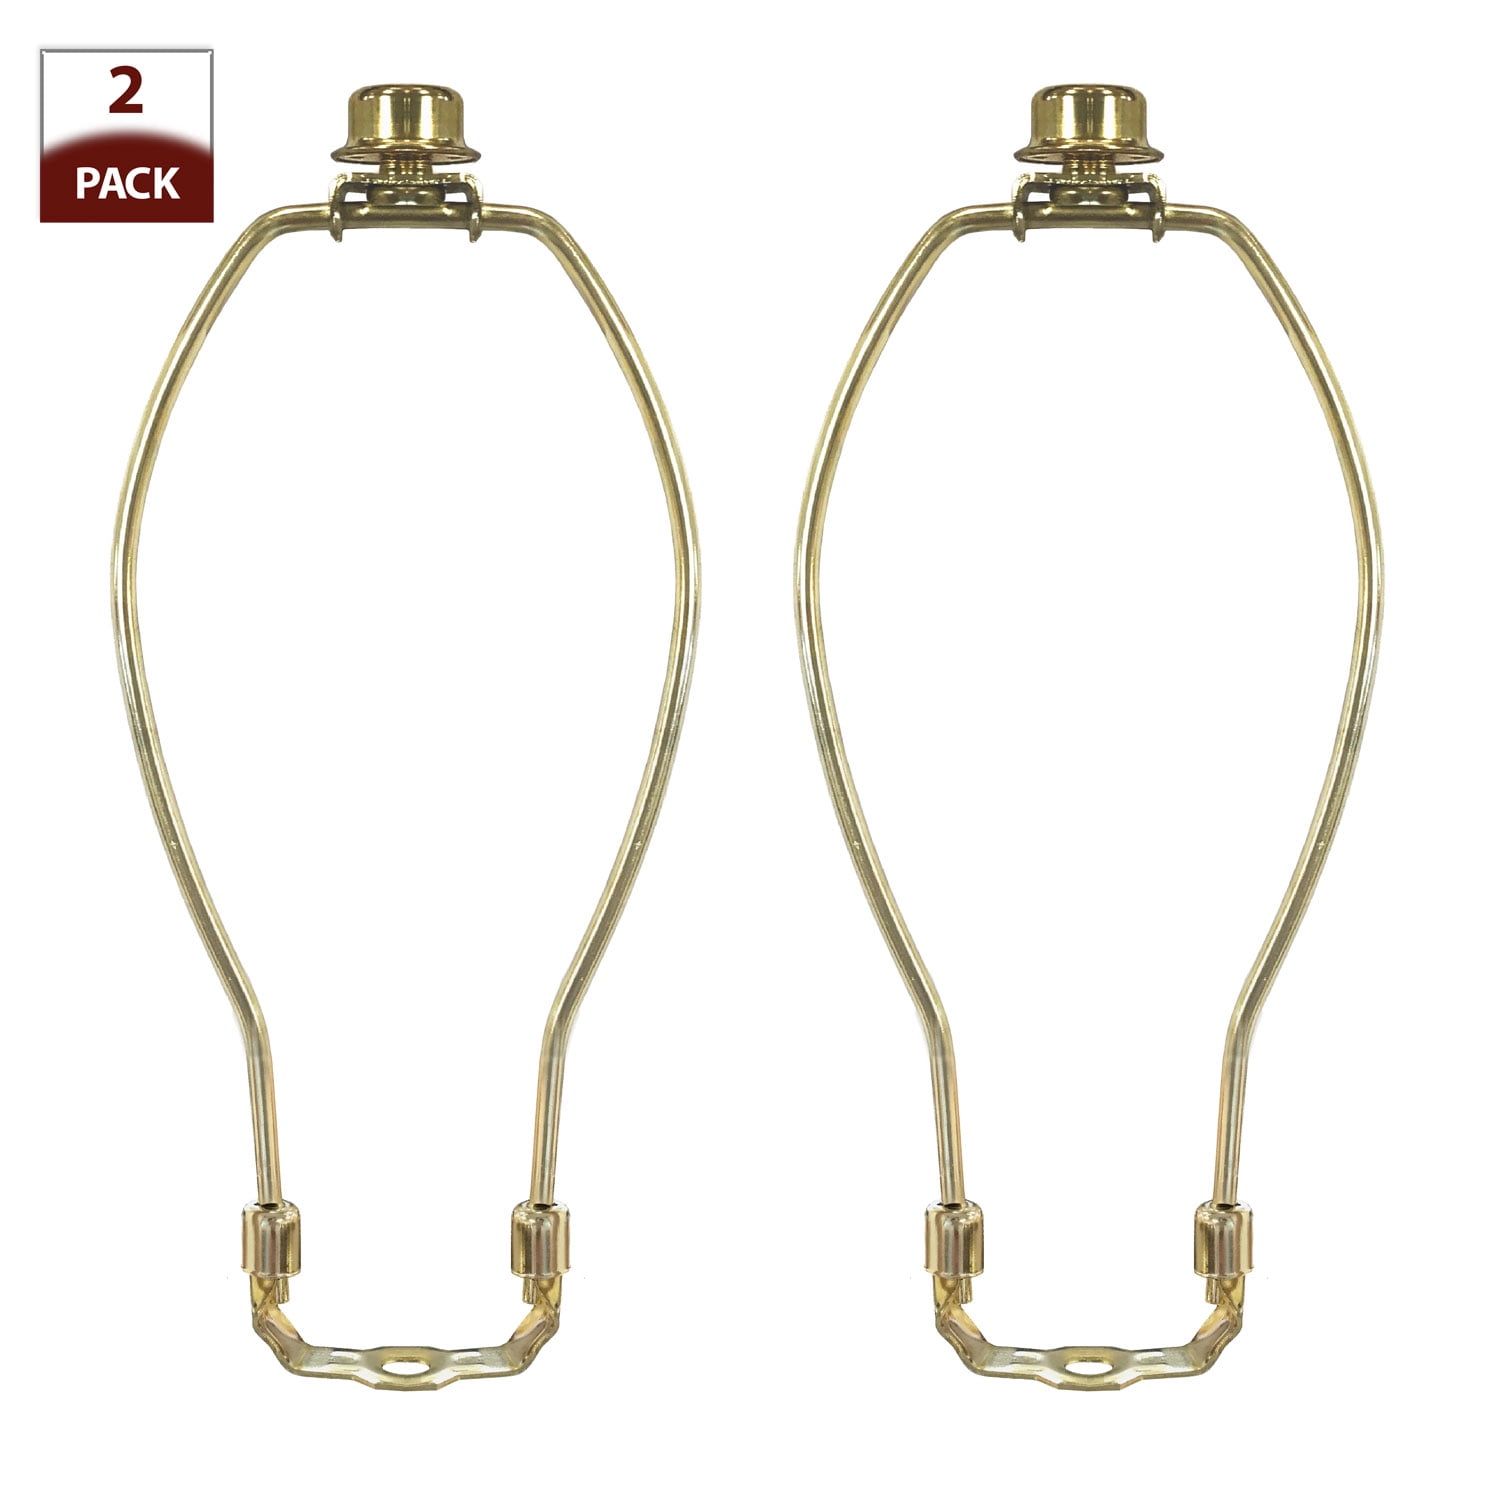 2-Piece Lamp Shade Holders Details about   Pack of 2 Lamp Harps 